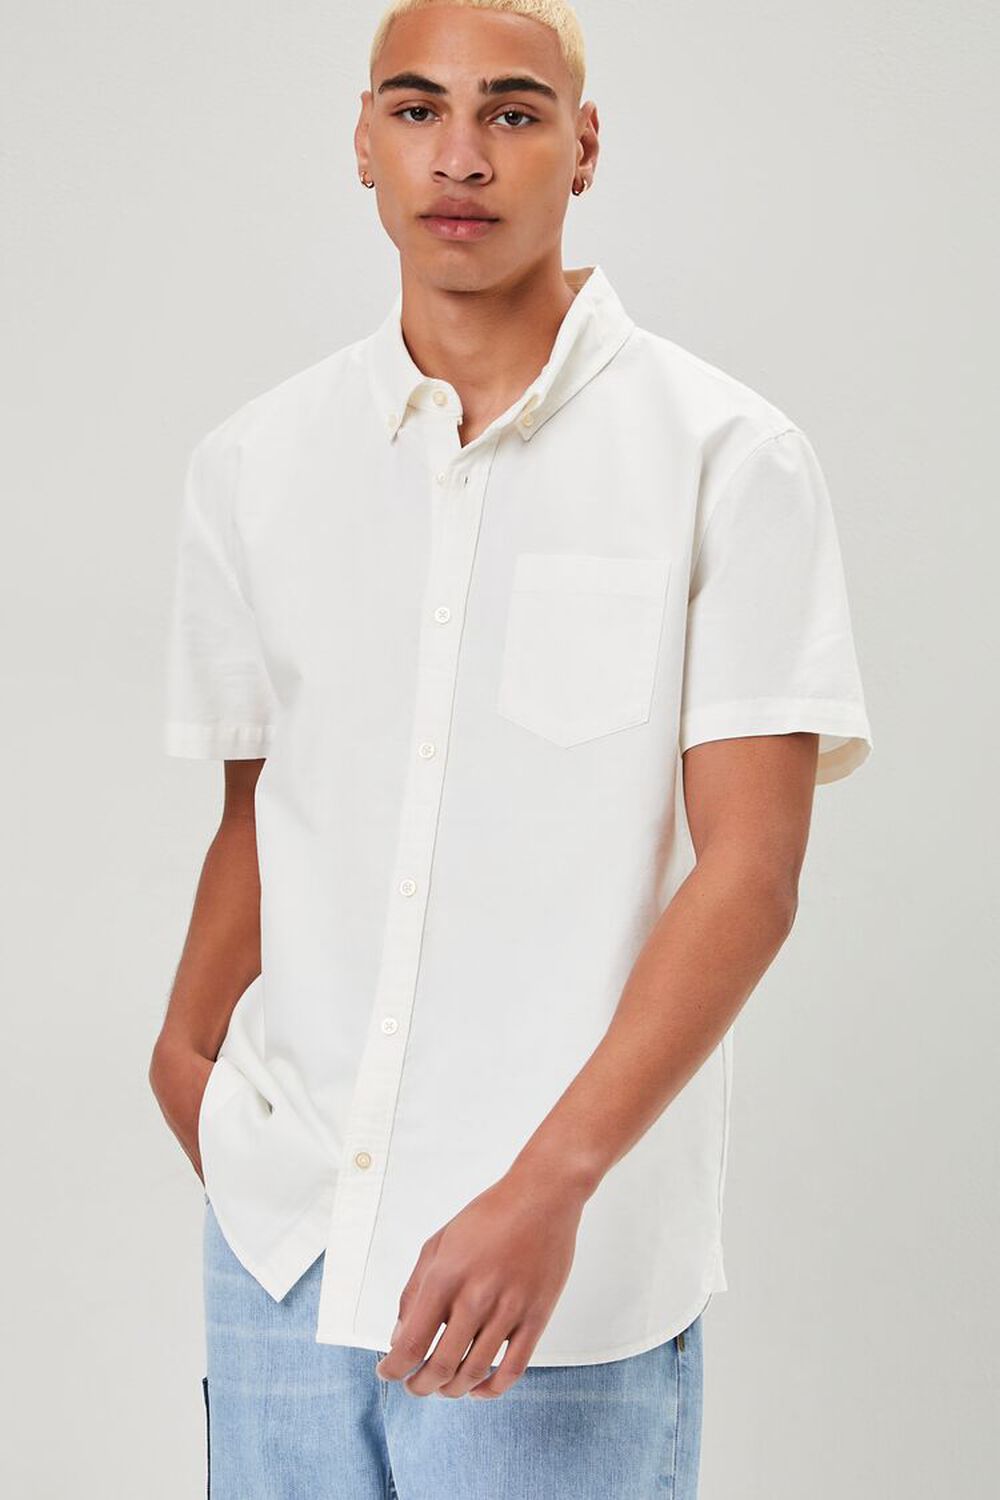 WHITE Pocket Button-Front Shirt, image 1